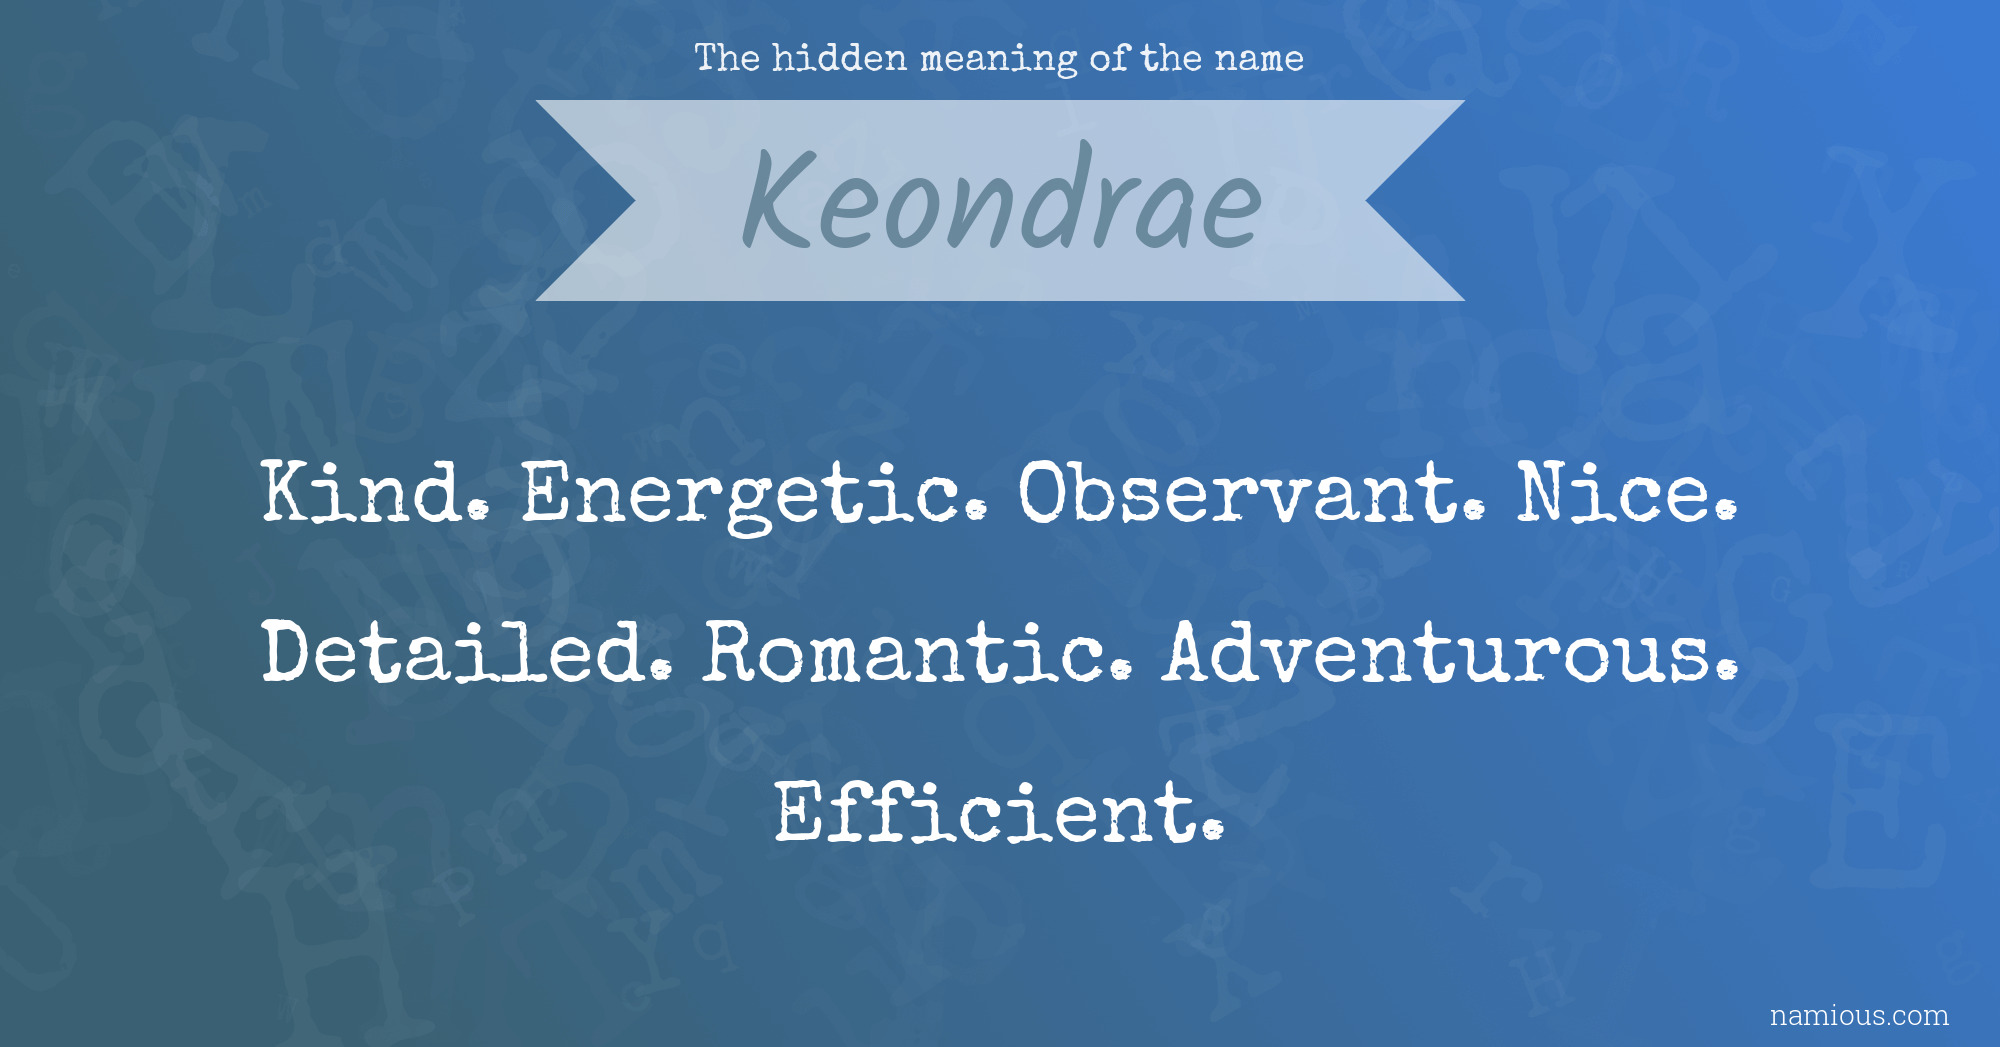 The hidden meaning of the name Keondrae